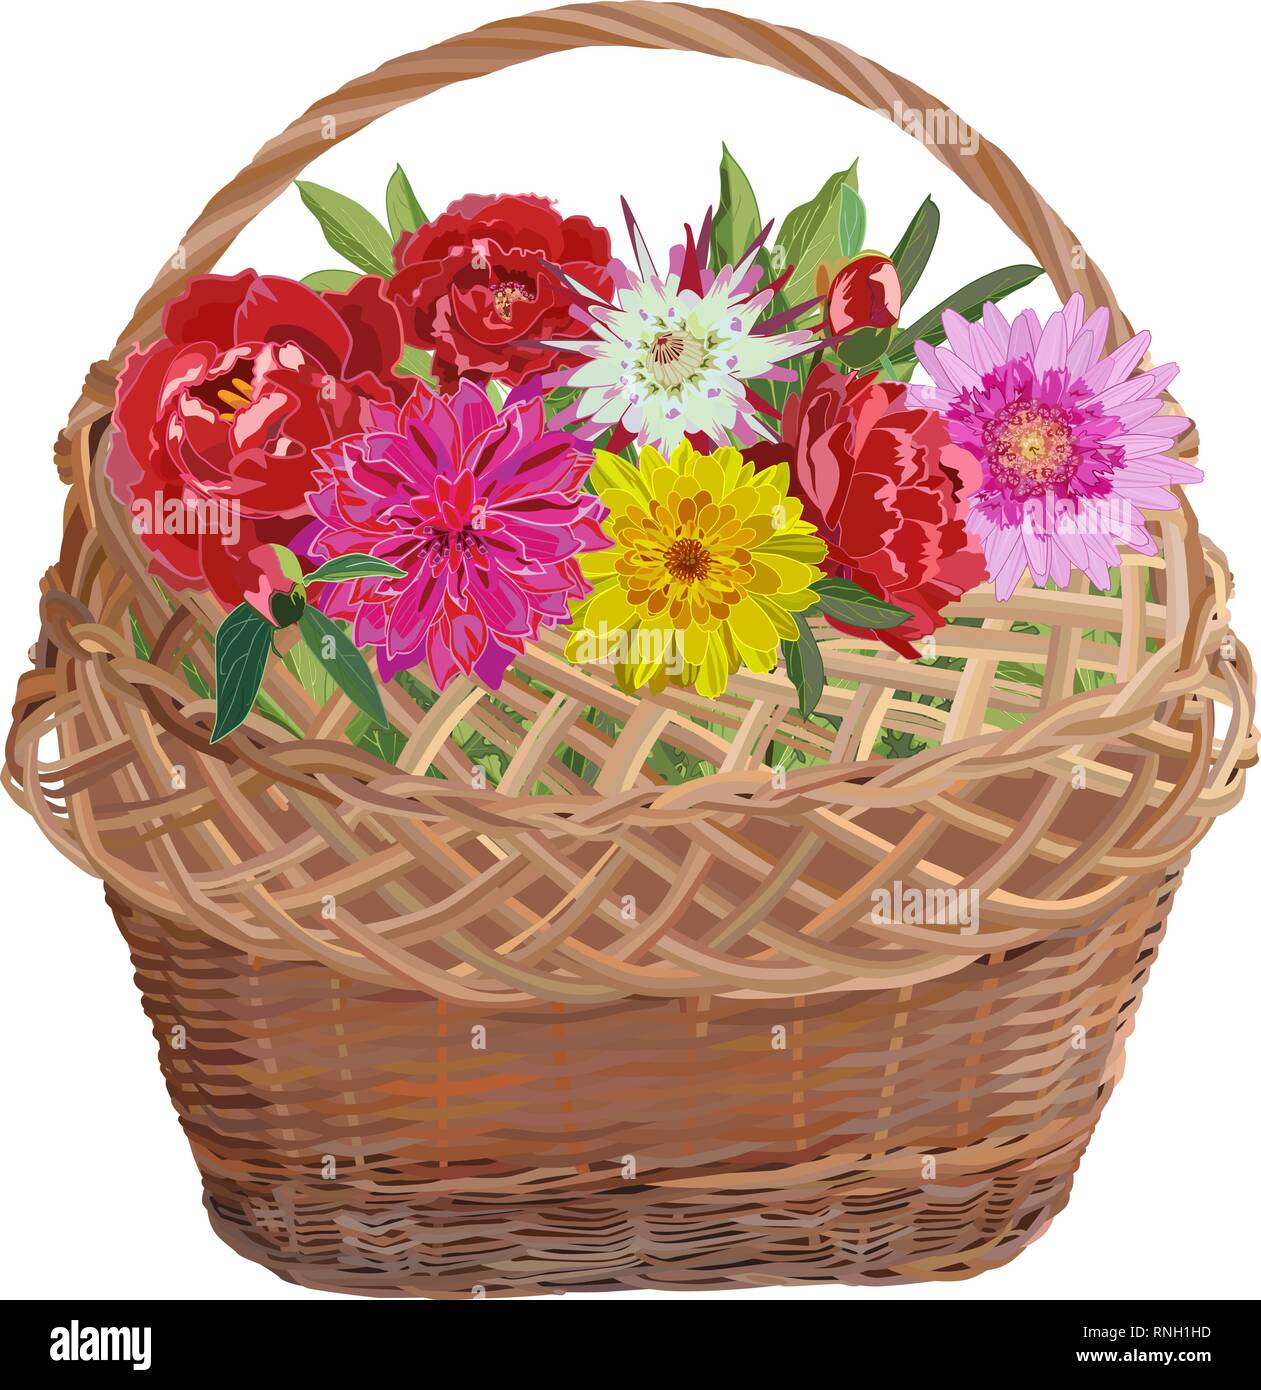 Wicker basket with peony and chrysanthemum flowers. Vector flat illustration isolated on white background. Stock Vector